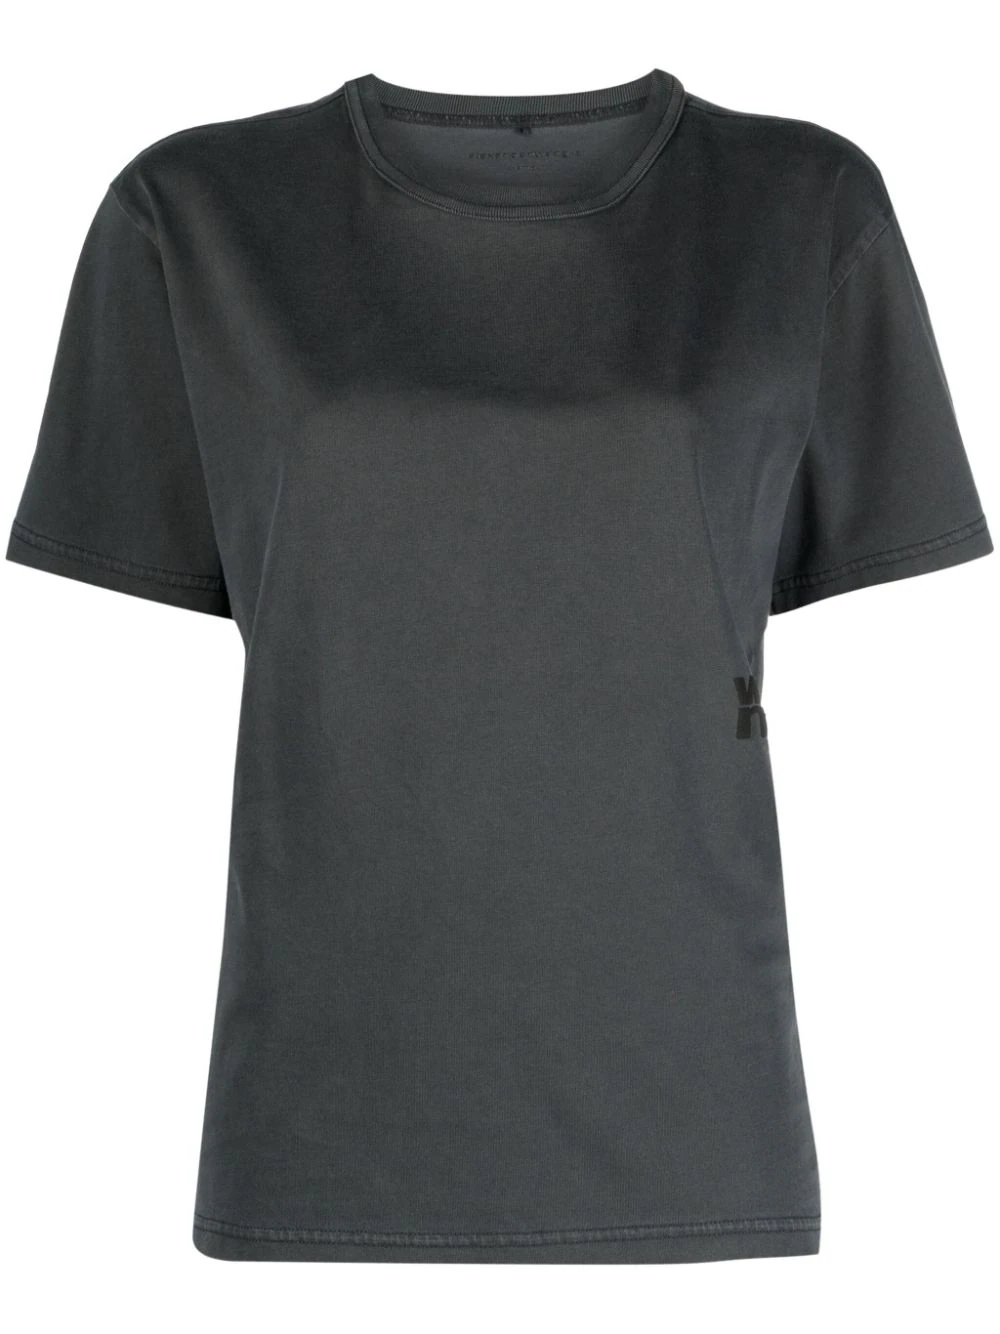 Shop Alexander Wang T-shirt With Embossed Logo In Grey